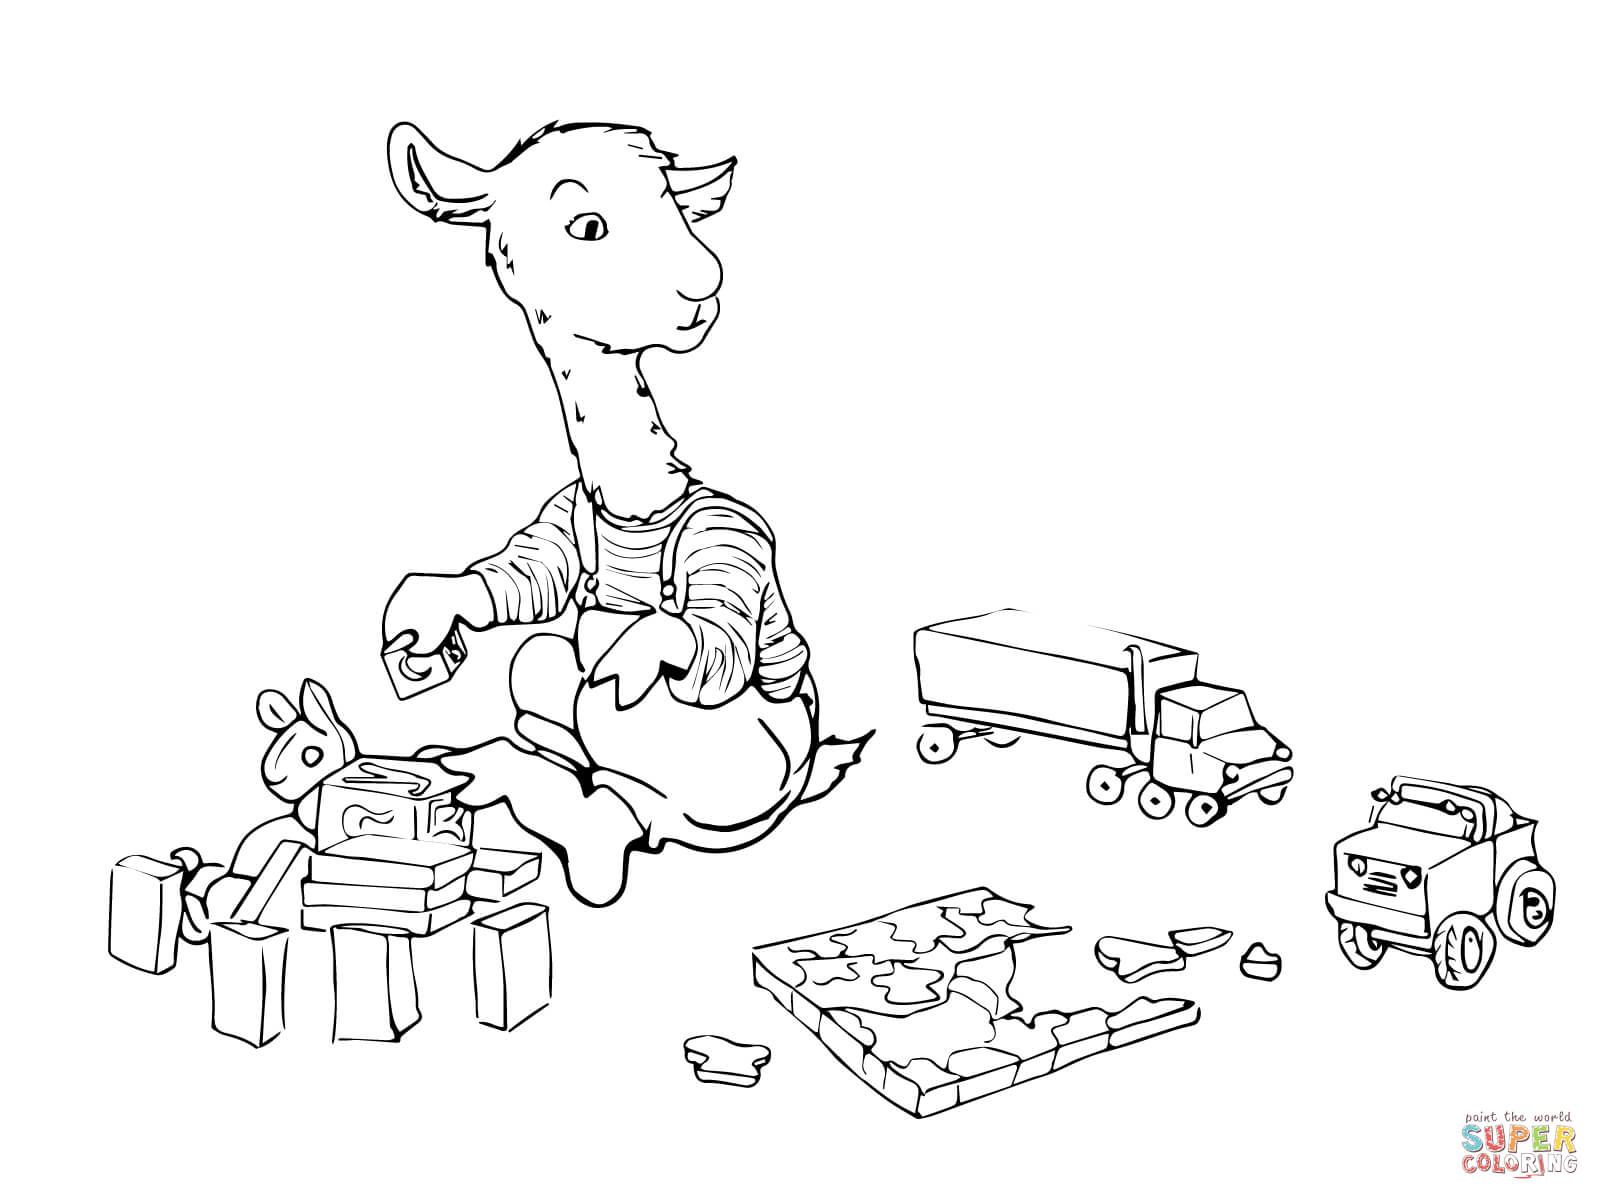 Llama Coloring Pages Printable - Get Coloring Pages